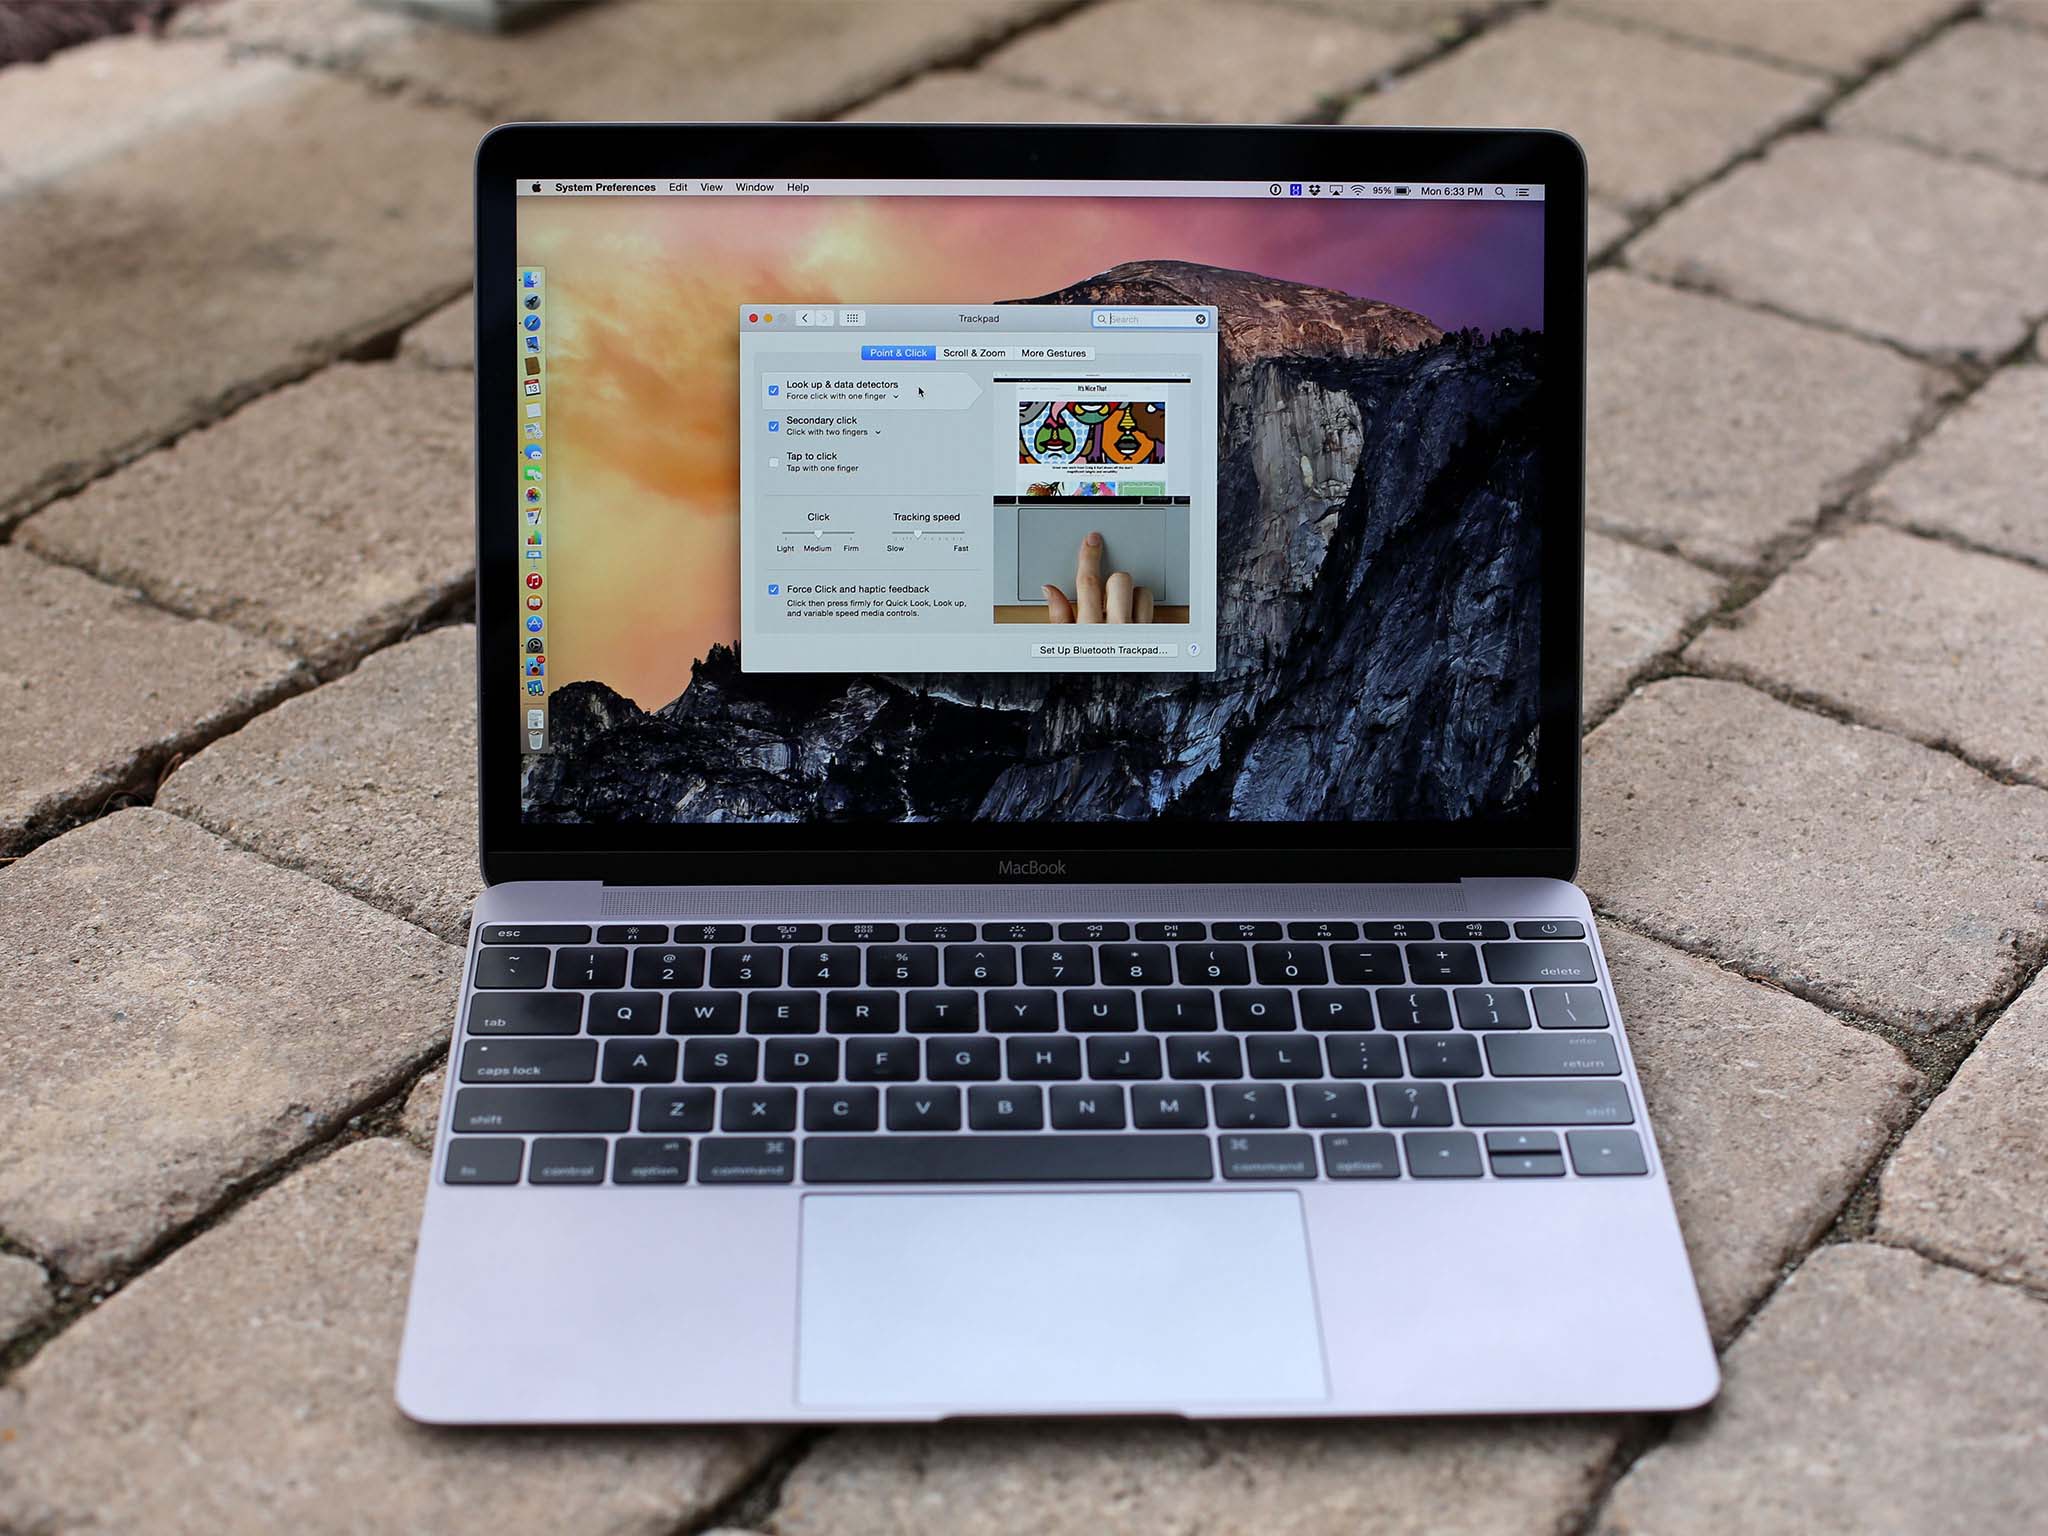 Force Touch Trackpad for Mac: Ultimate guide | iMore